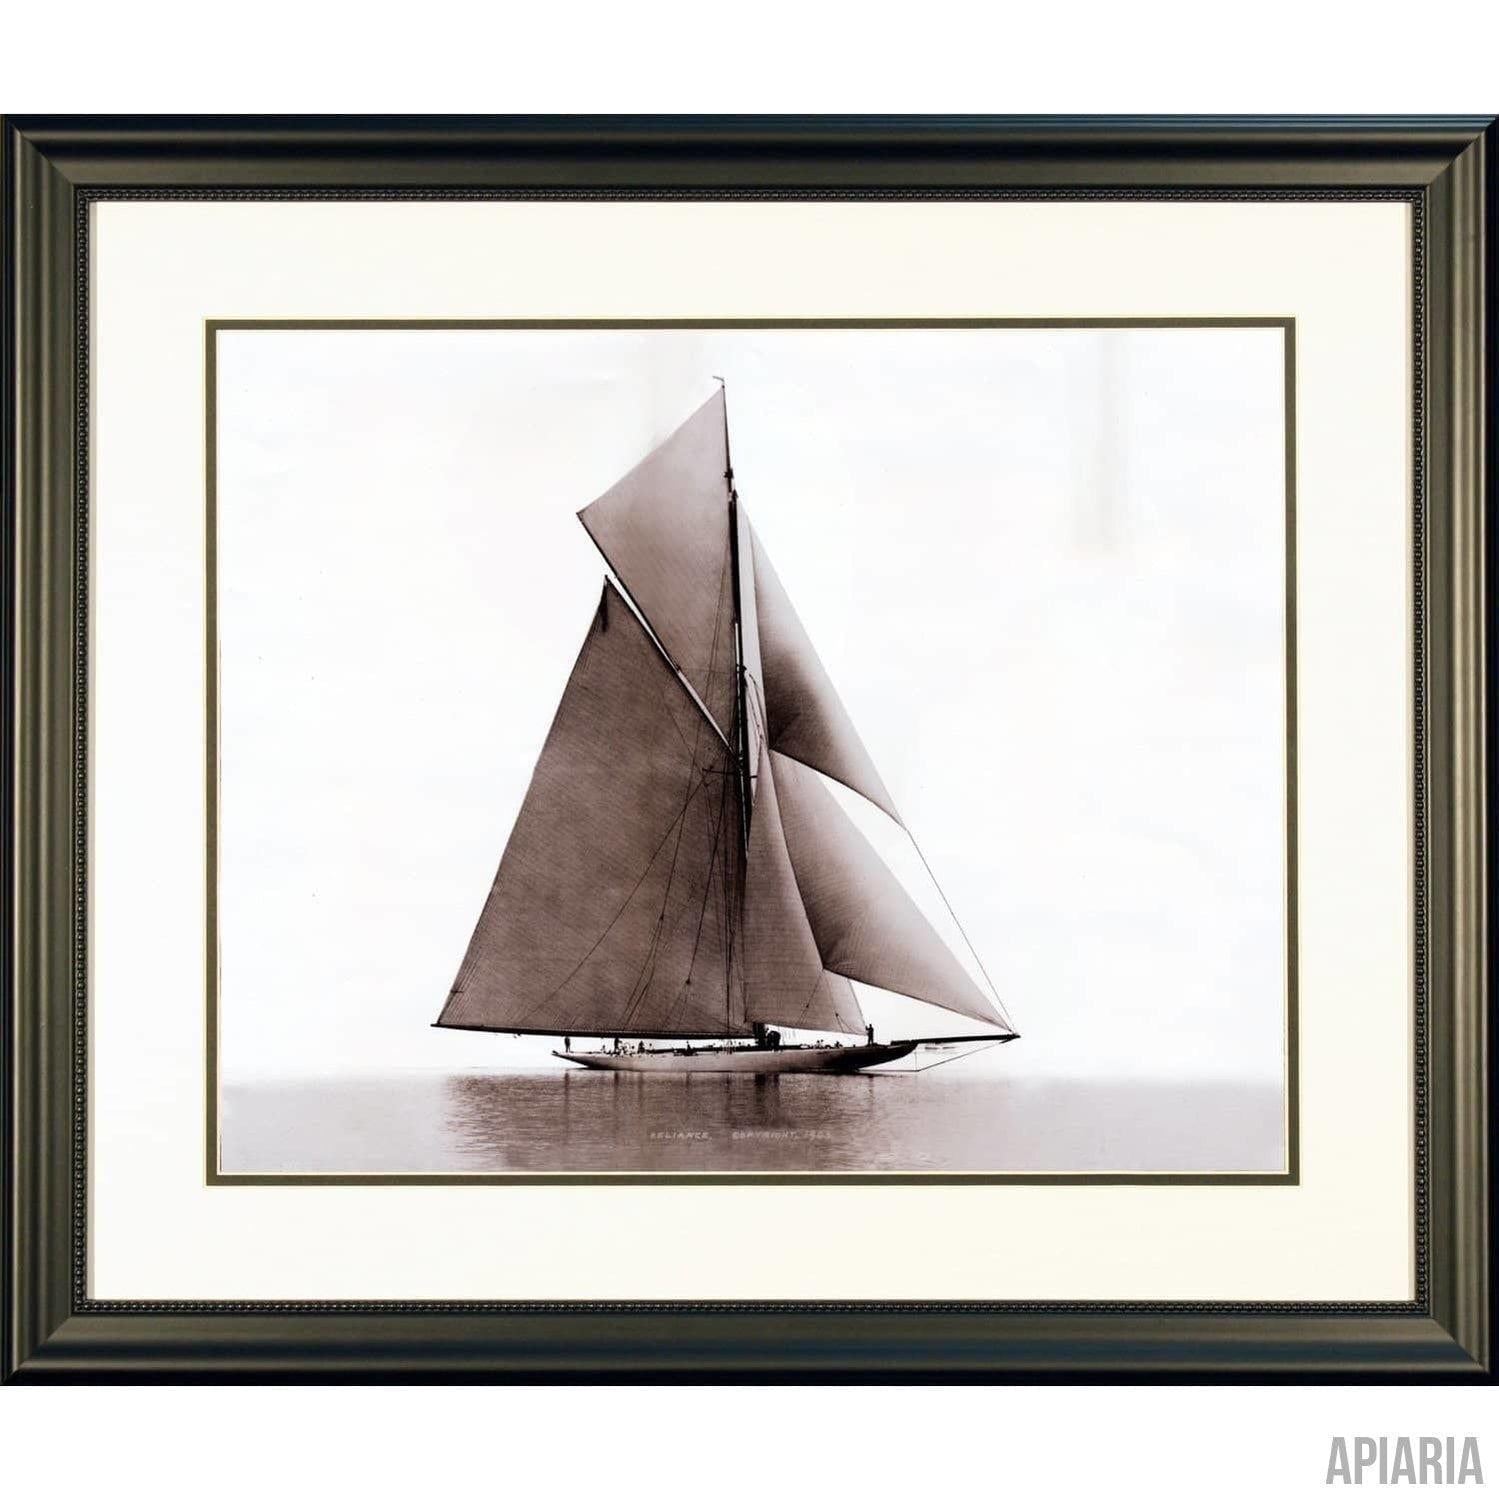 The Yacht Reliance - 1903 America's Cup Winner-Framed Item-Apiaria